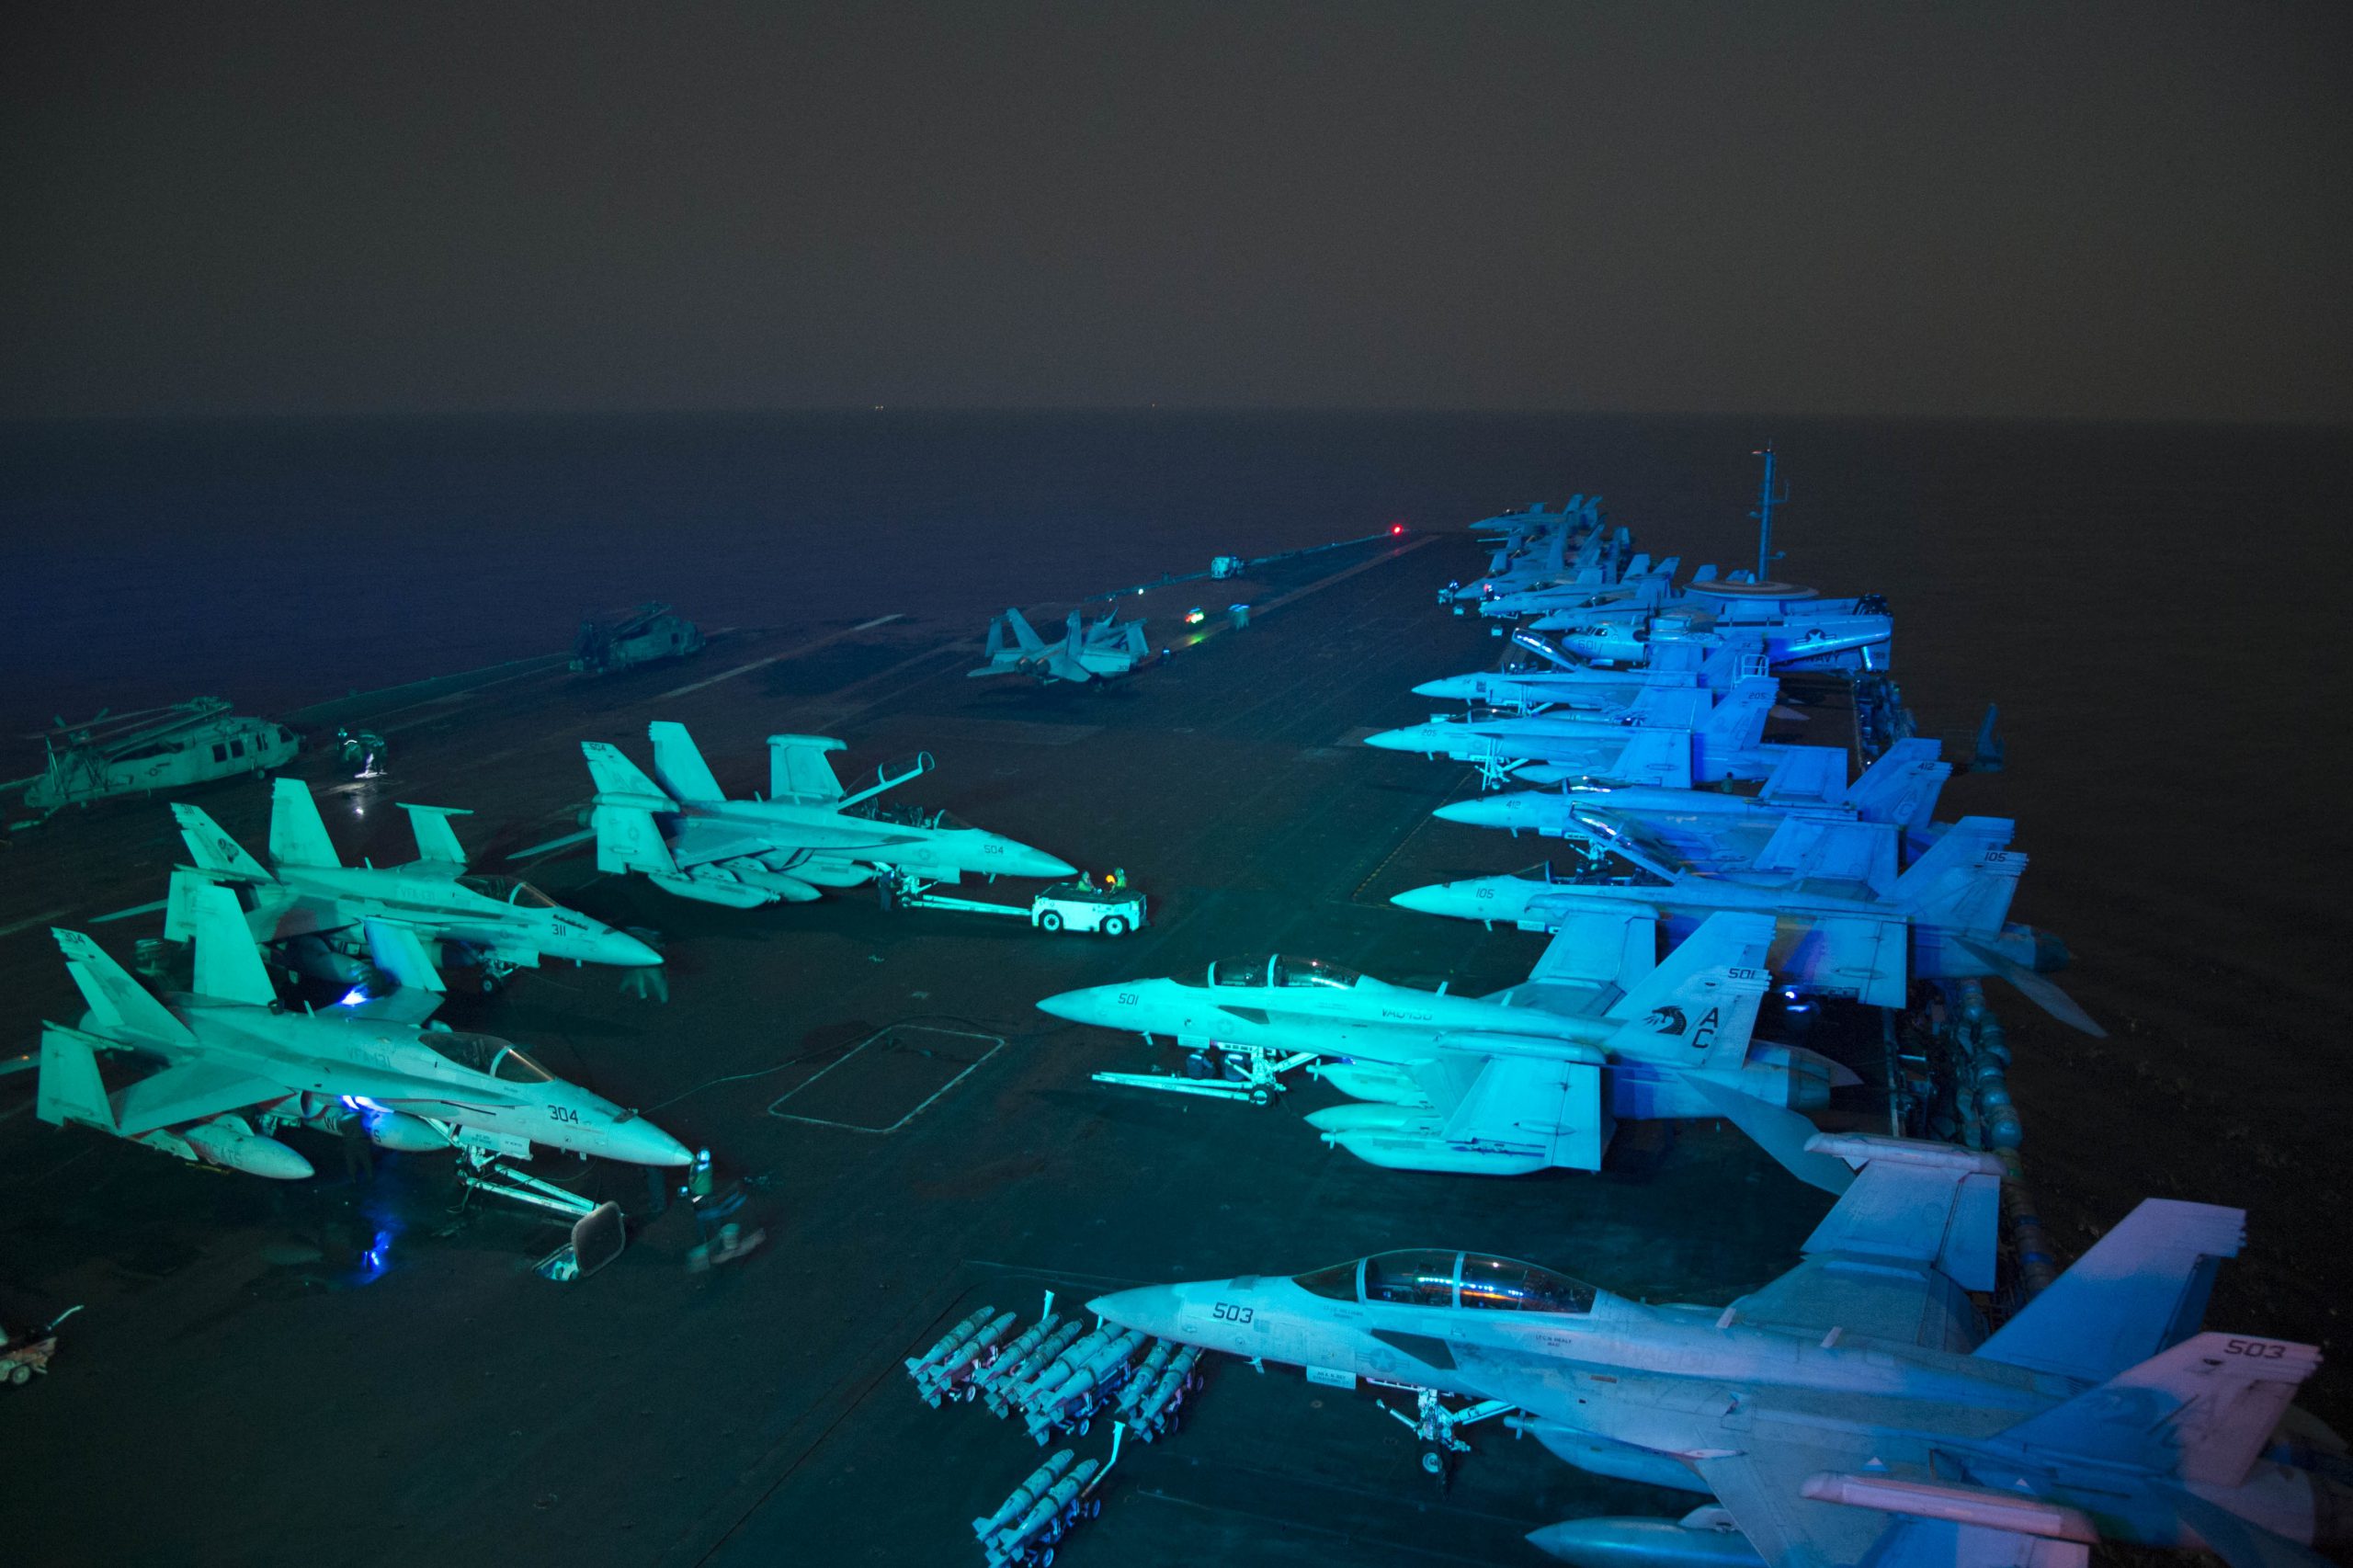 Sailors prepare for flight operations on the flight deck of the aircraft carrier USS Dwight D. Eisenhower in the Persian Gulf, Oct. 19, 2016. The Eisenhower Carrier Strike Group is deployed in support of Operation Inherent Resolve, maritime security operations and theater security cooperation efforts in the U.S. 5th Fleet area of operations. Navy photo by Seaman Dartez C. Williams. -